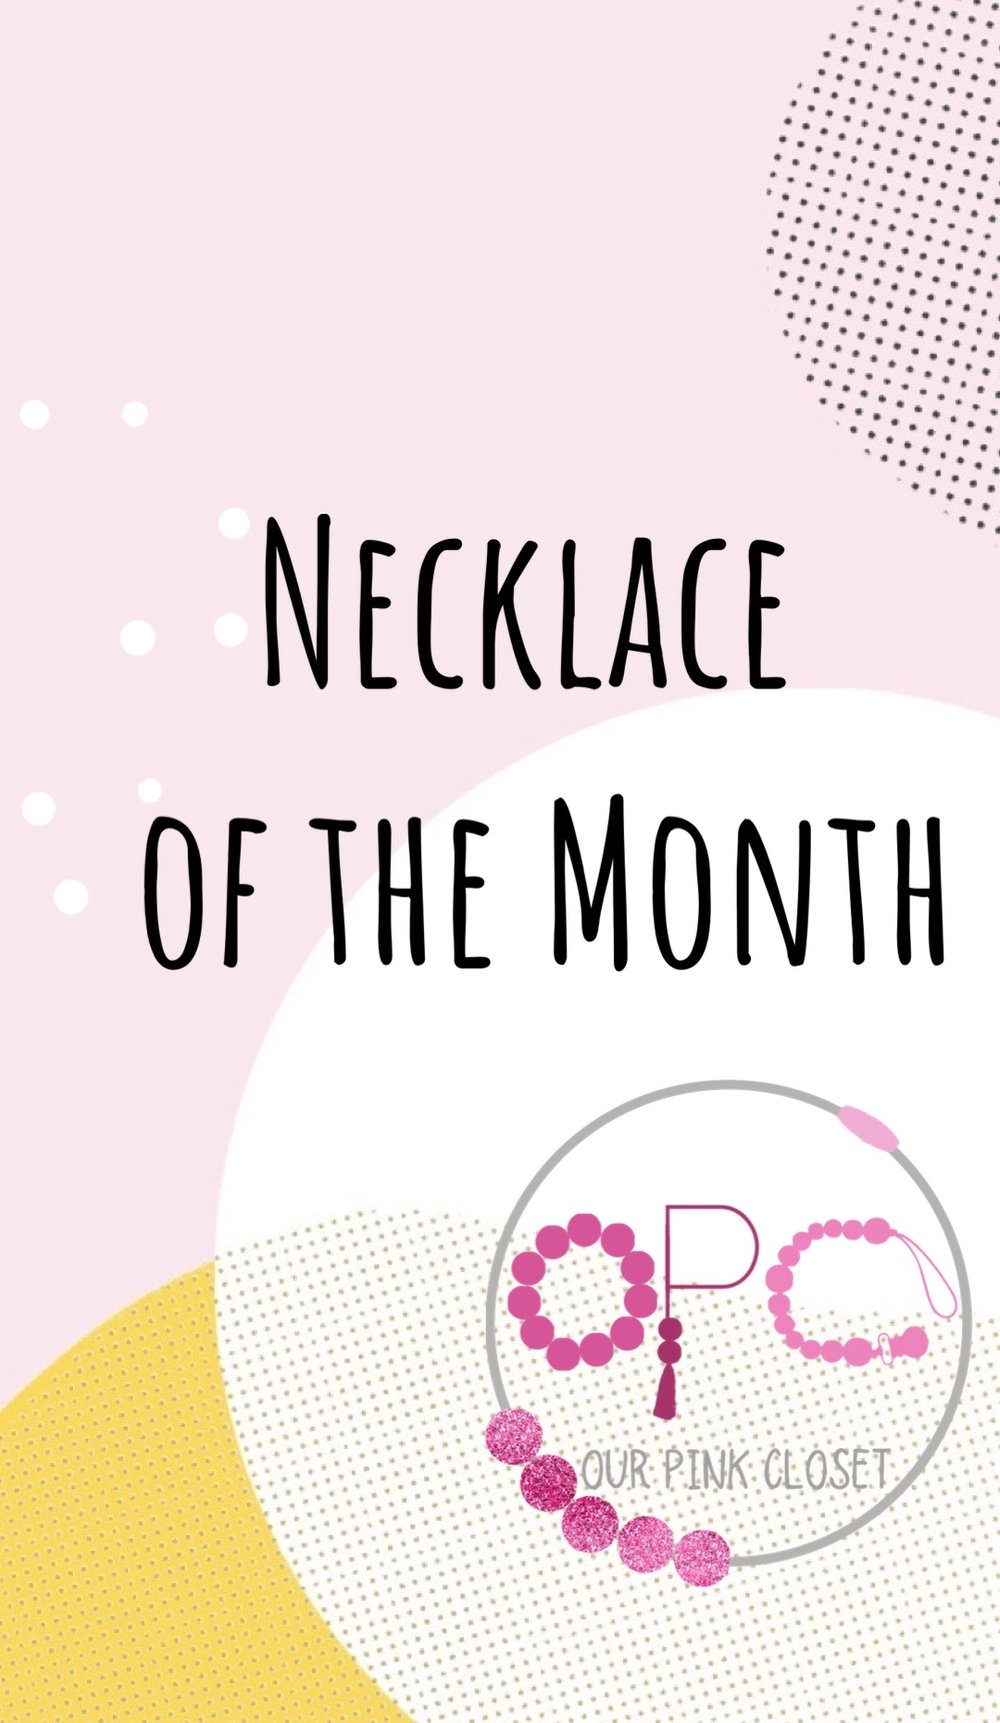 Image of Necklace of the Month 